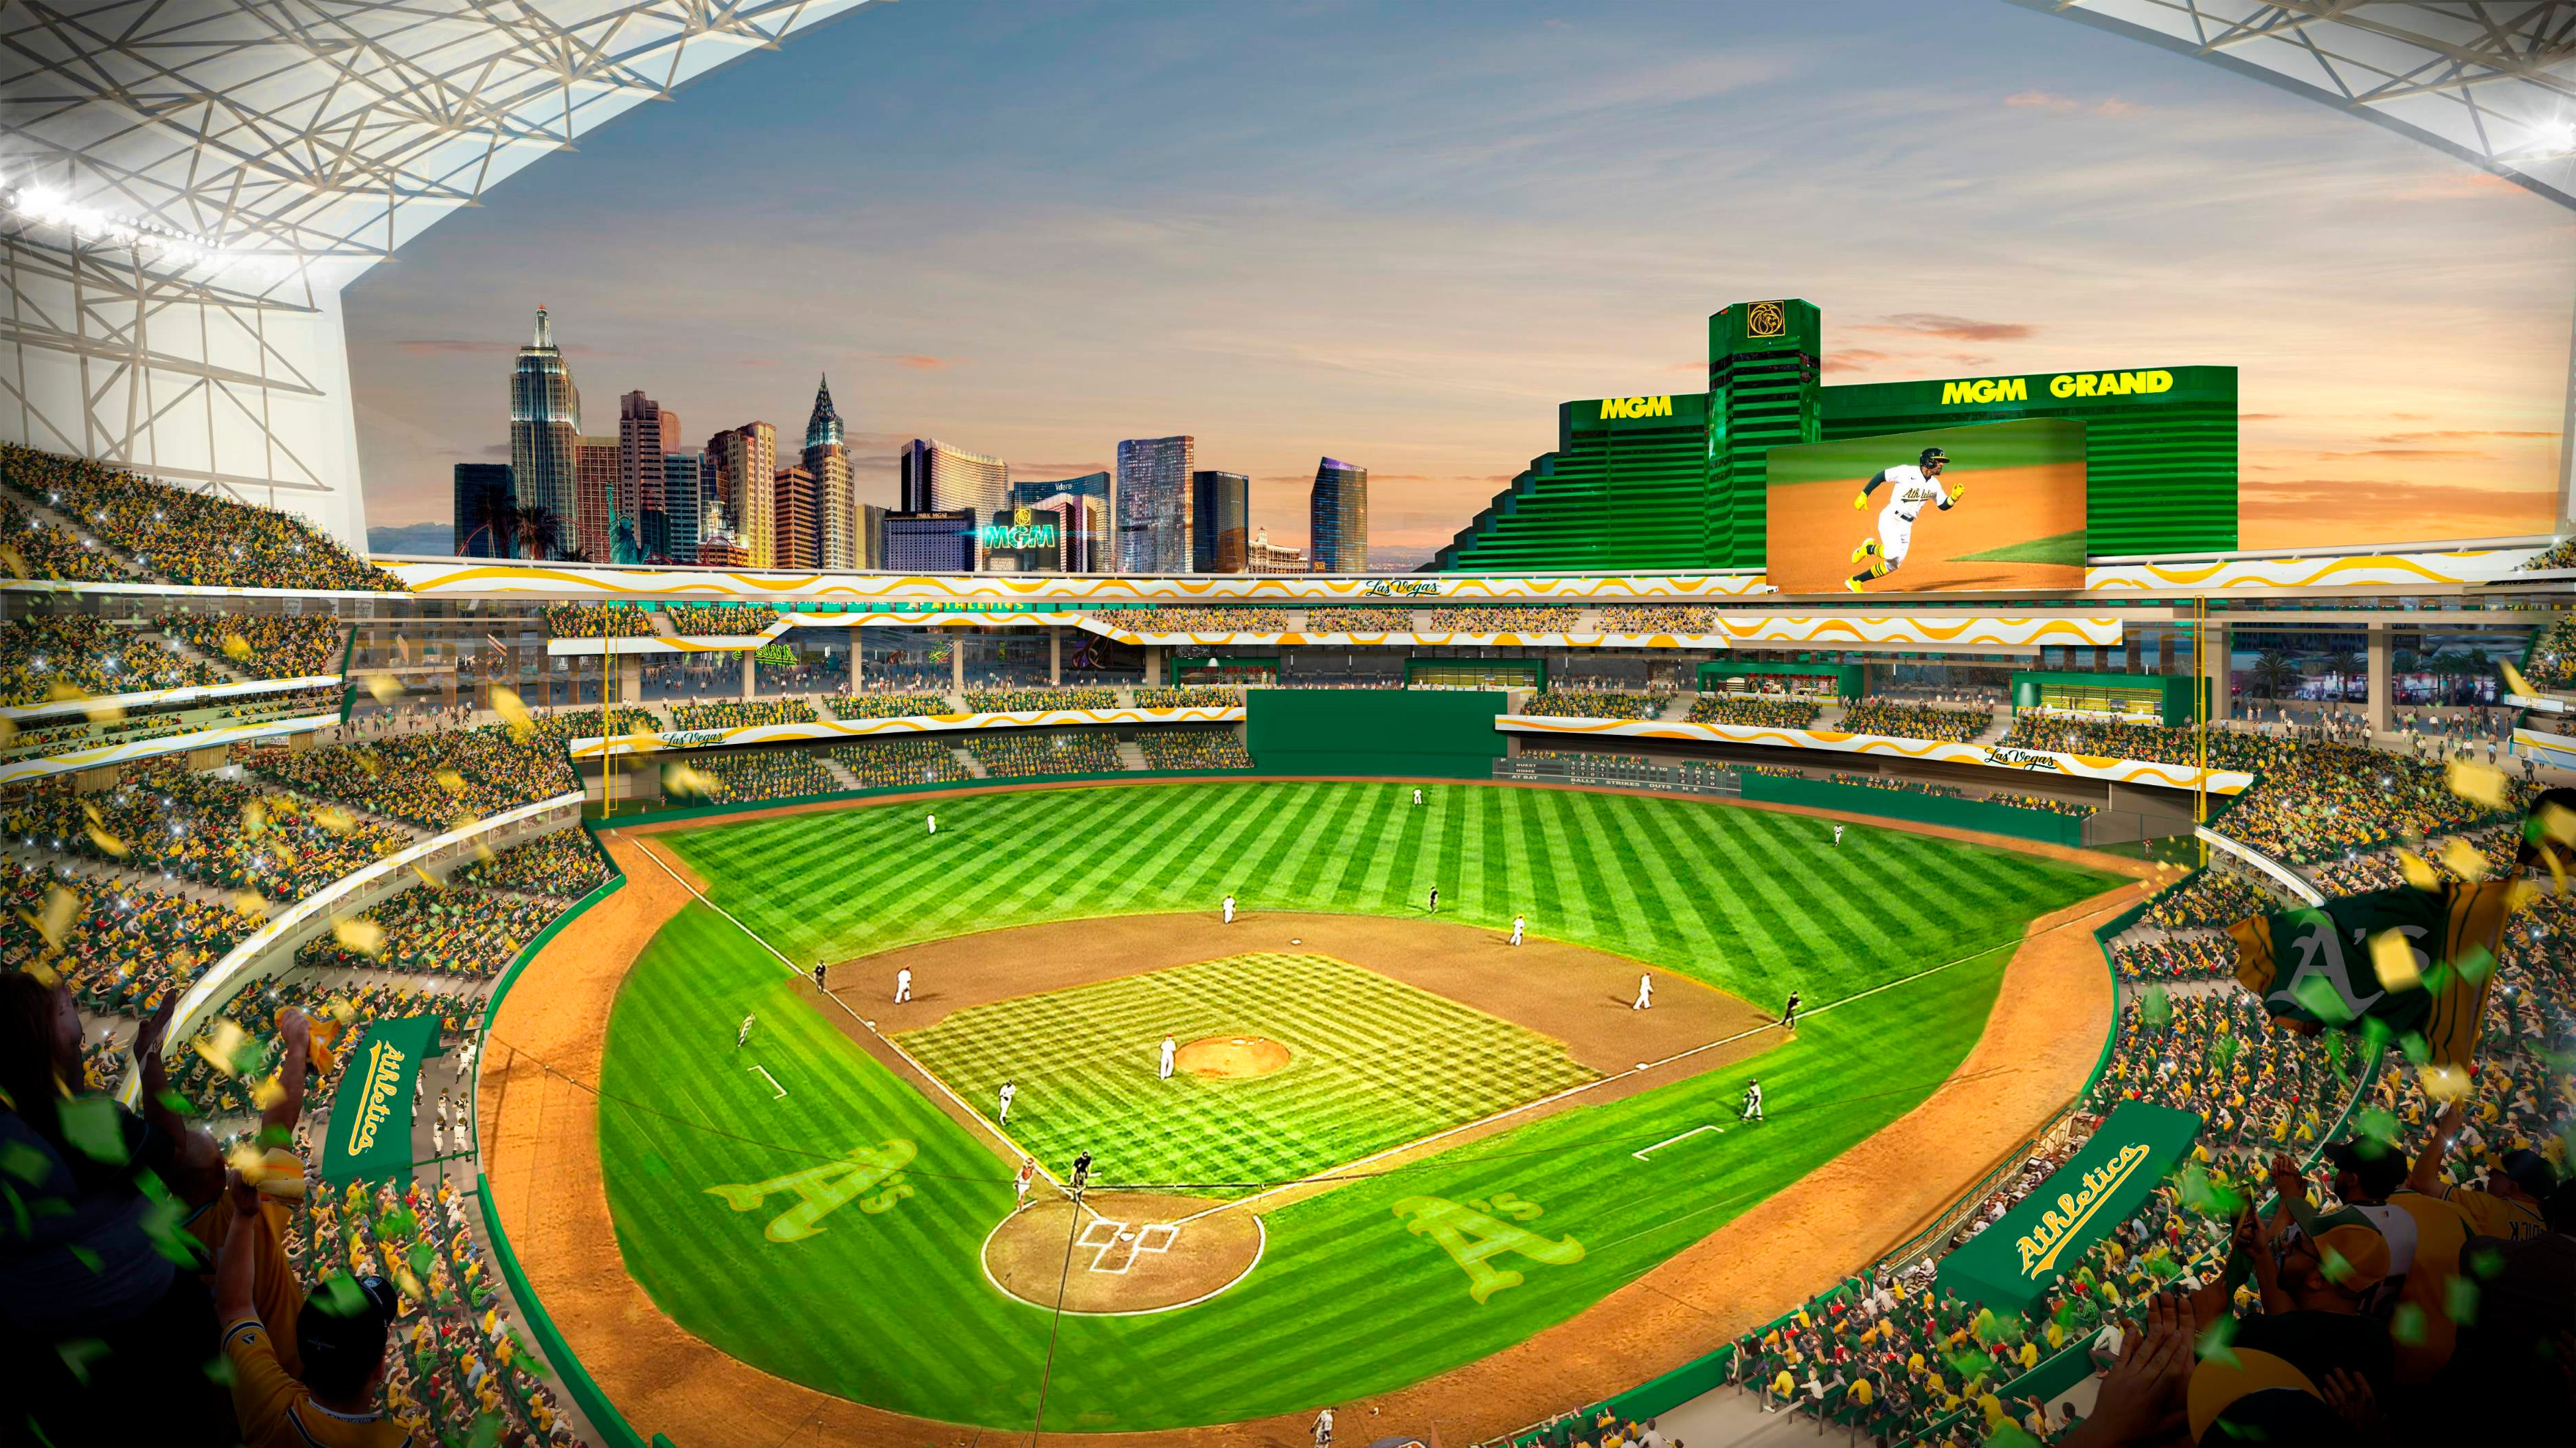 Governor signs public funding bill for new A's stadium in Vegas